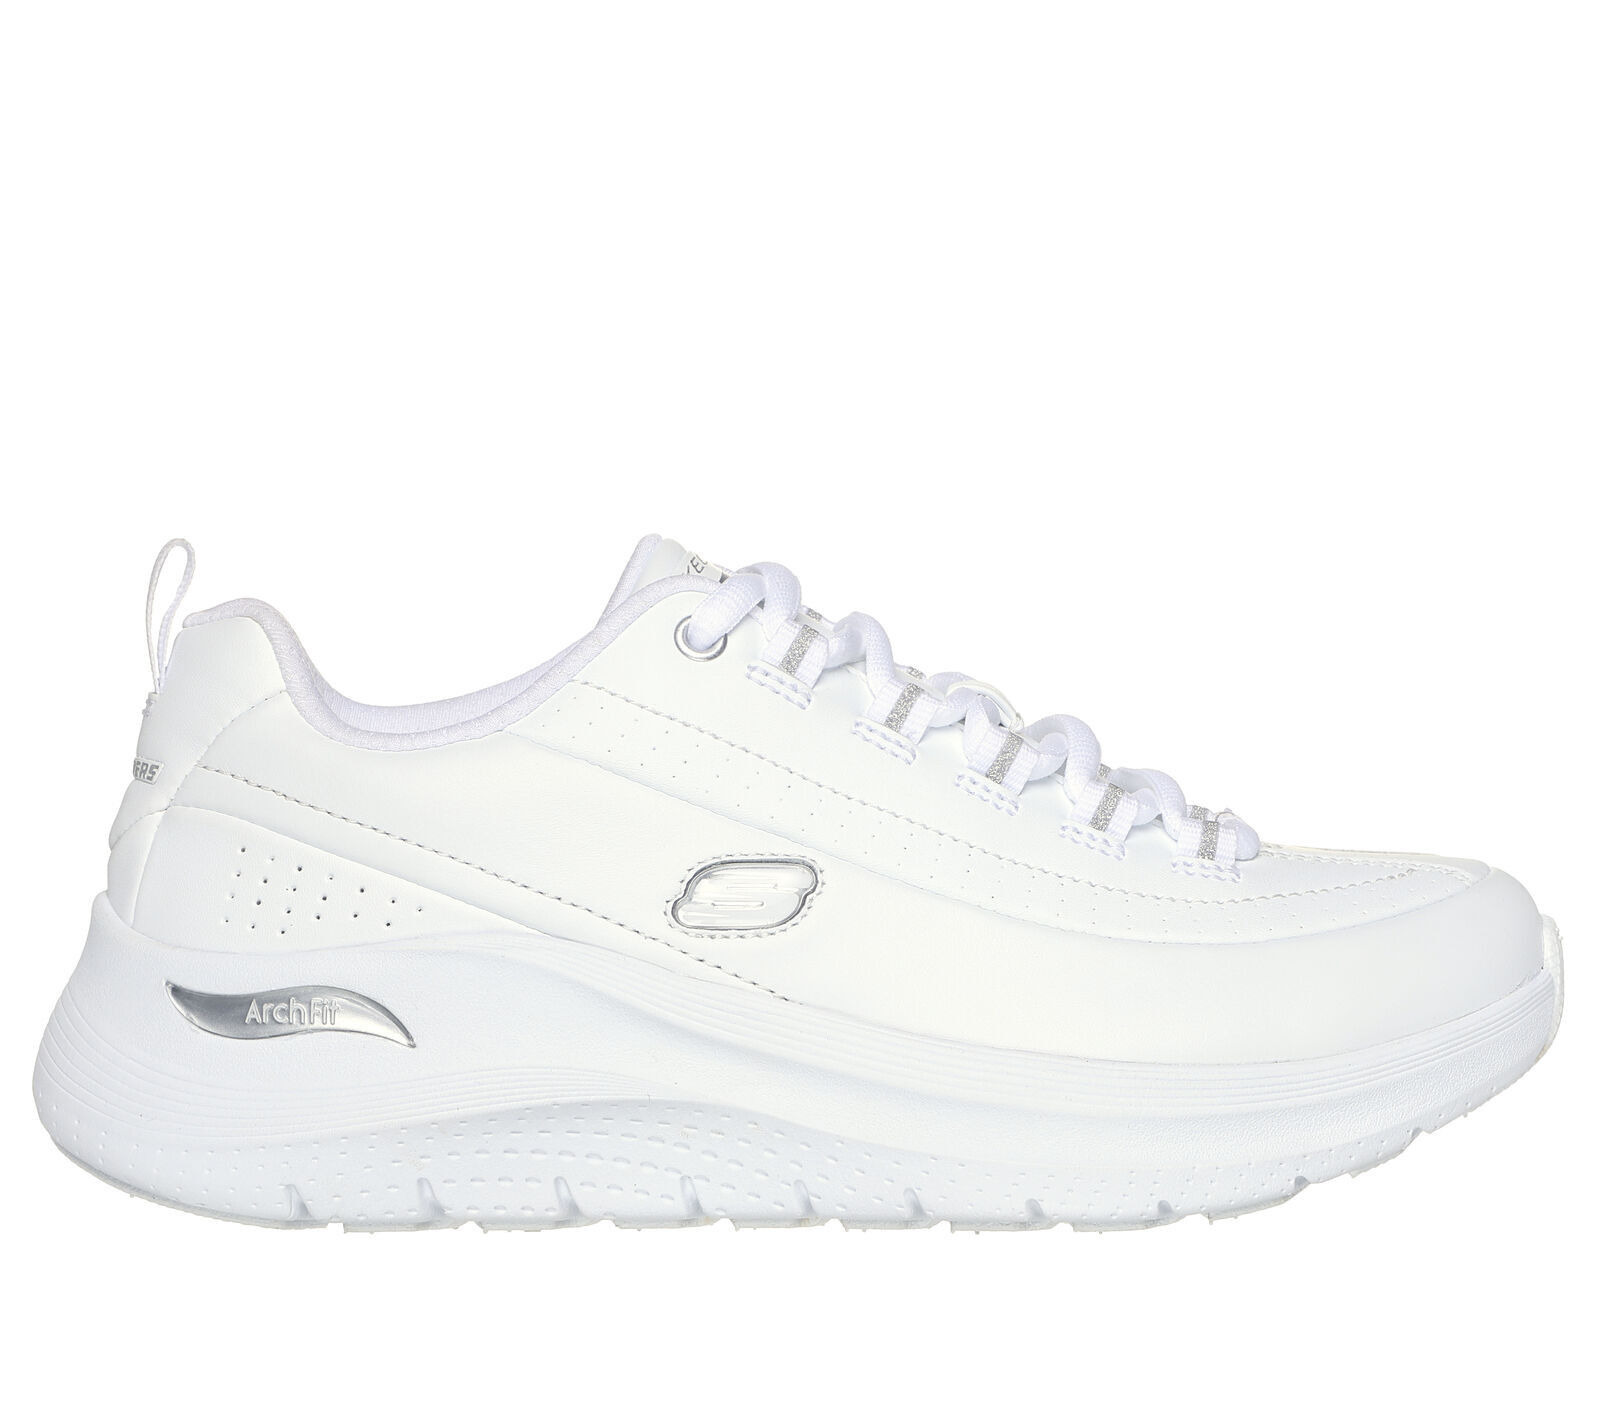 Skechers Arch Fit 2.0 - Star Bound - Lifestyle shoes - Women's | Hardloop